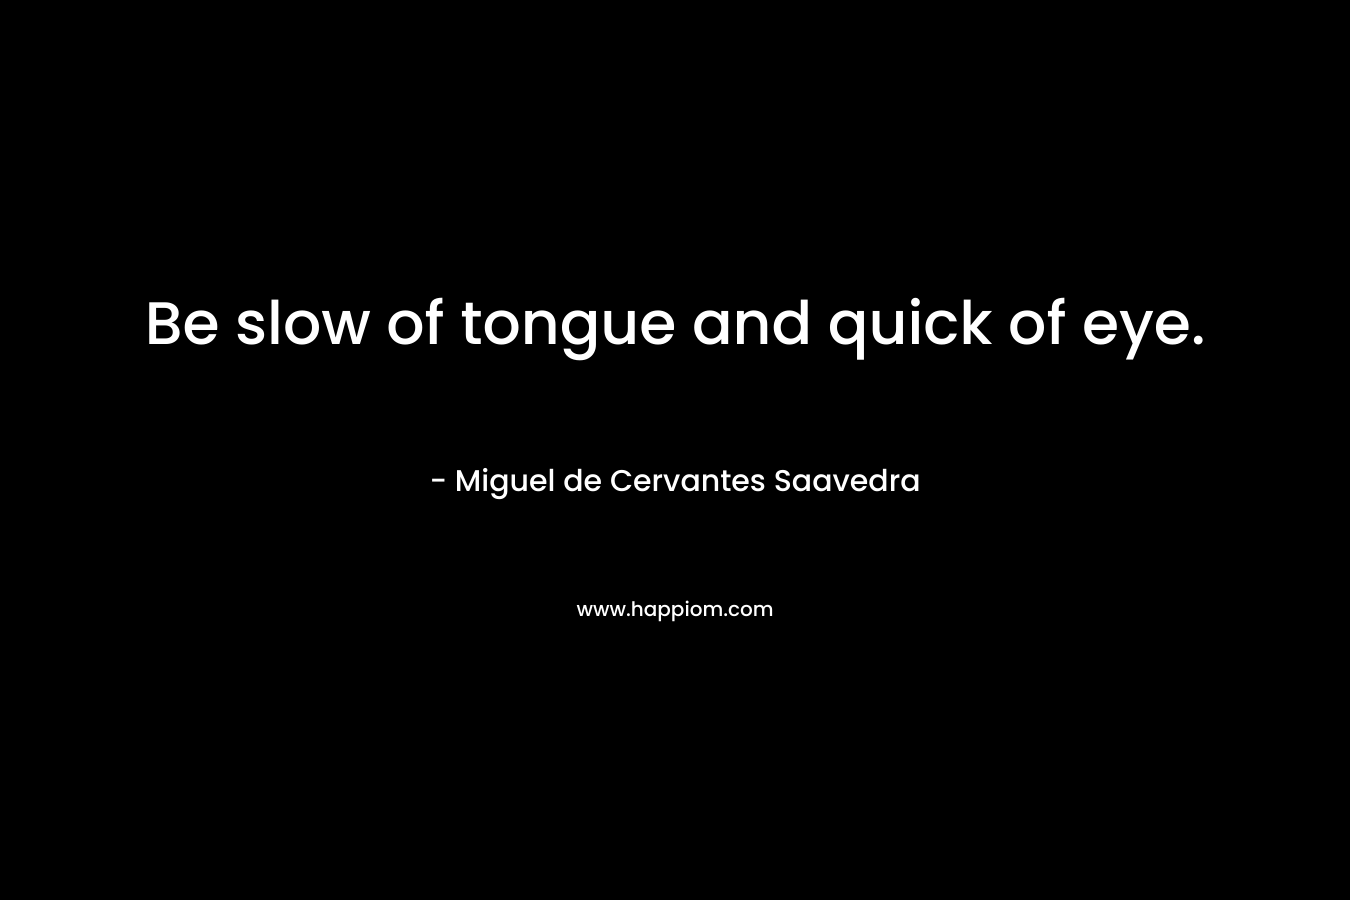 Be slow of tongue and quick of eye.